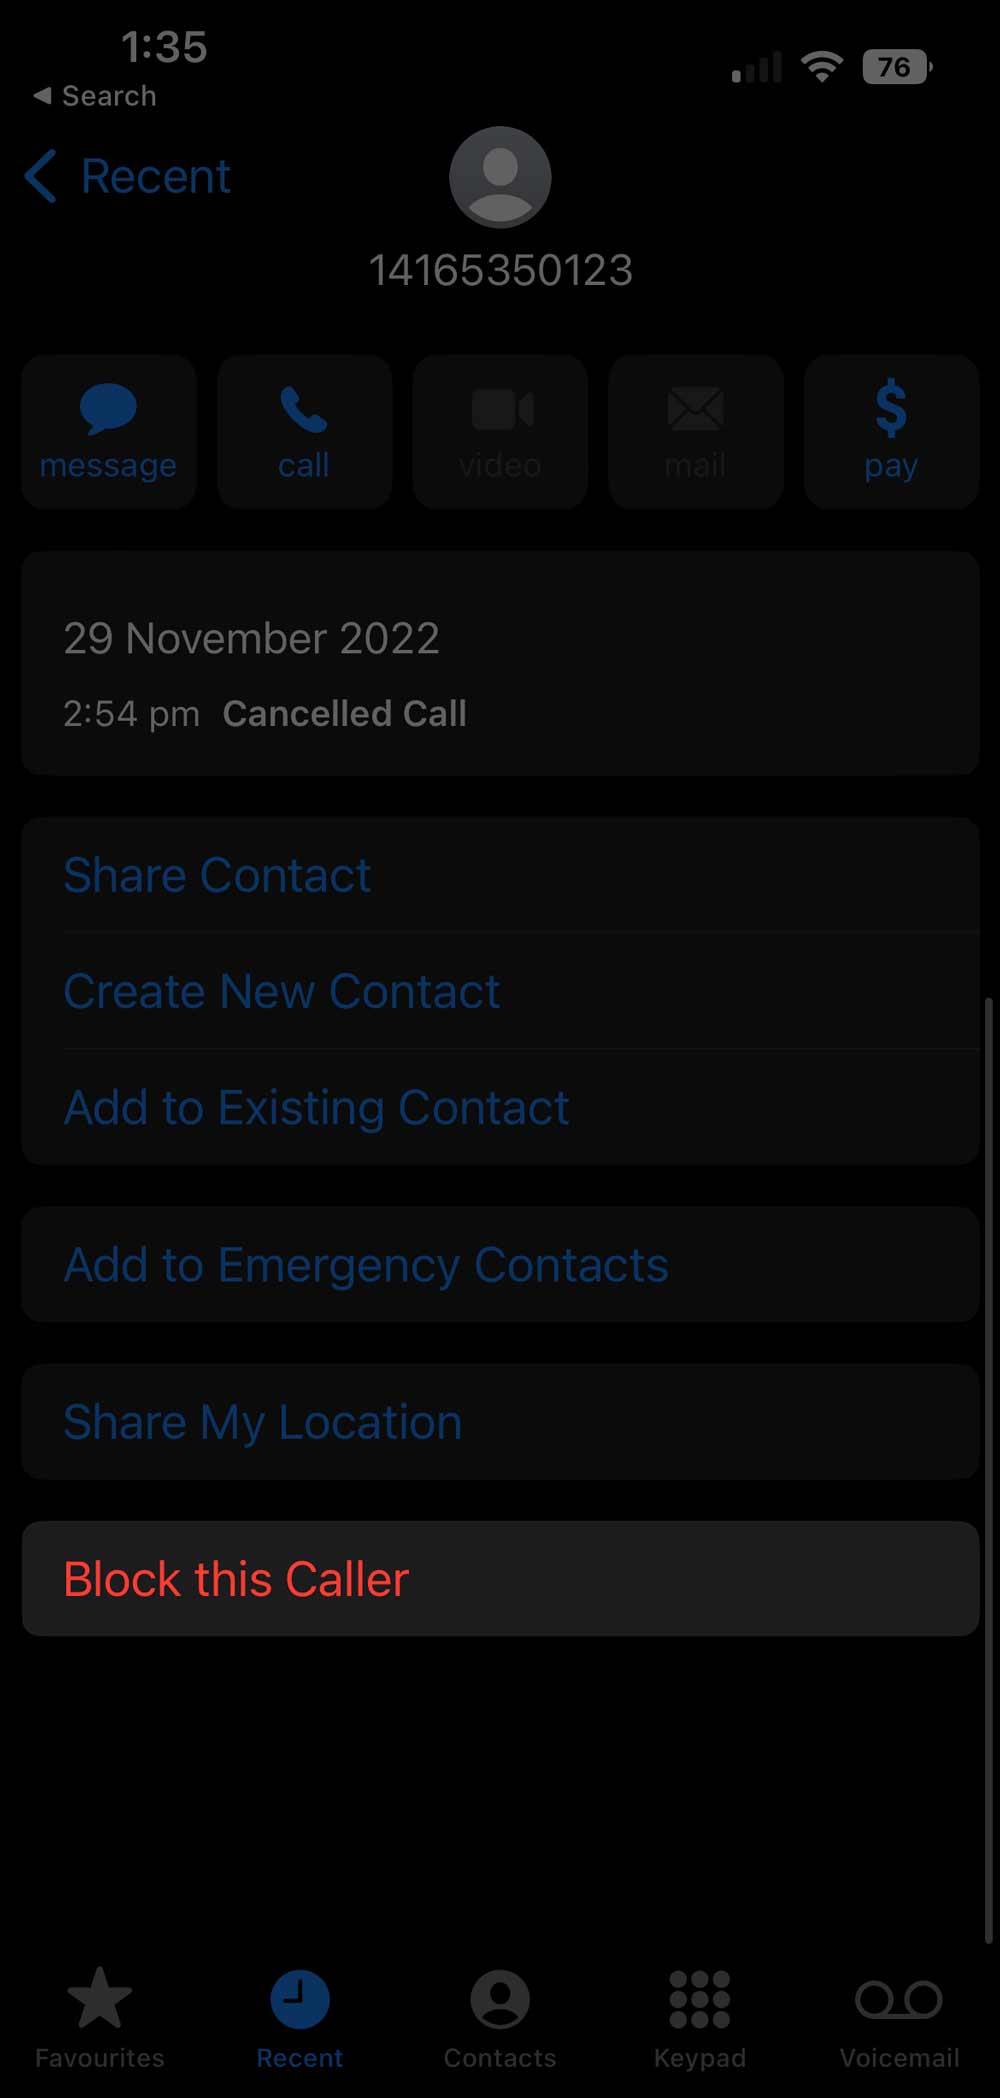 Tap on the Block this Caller option.